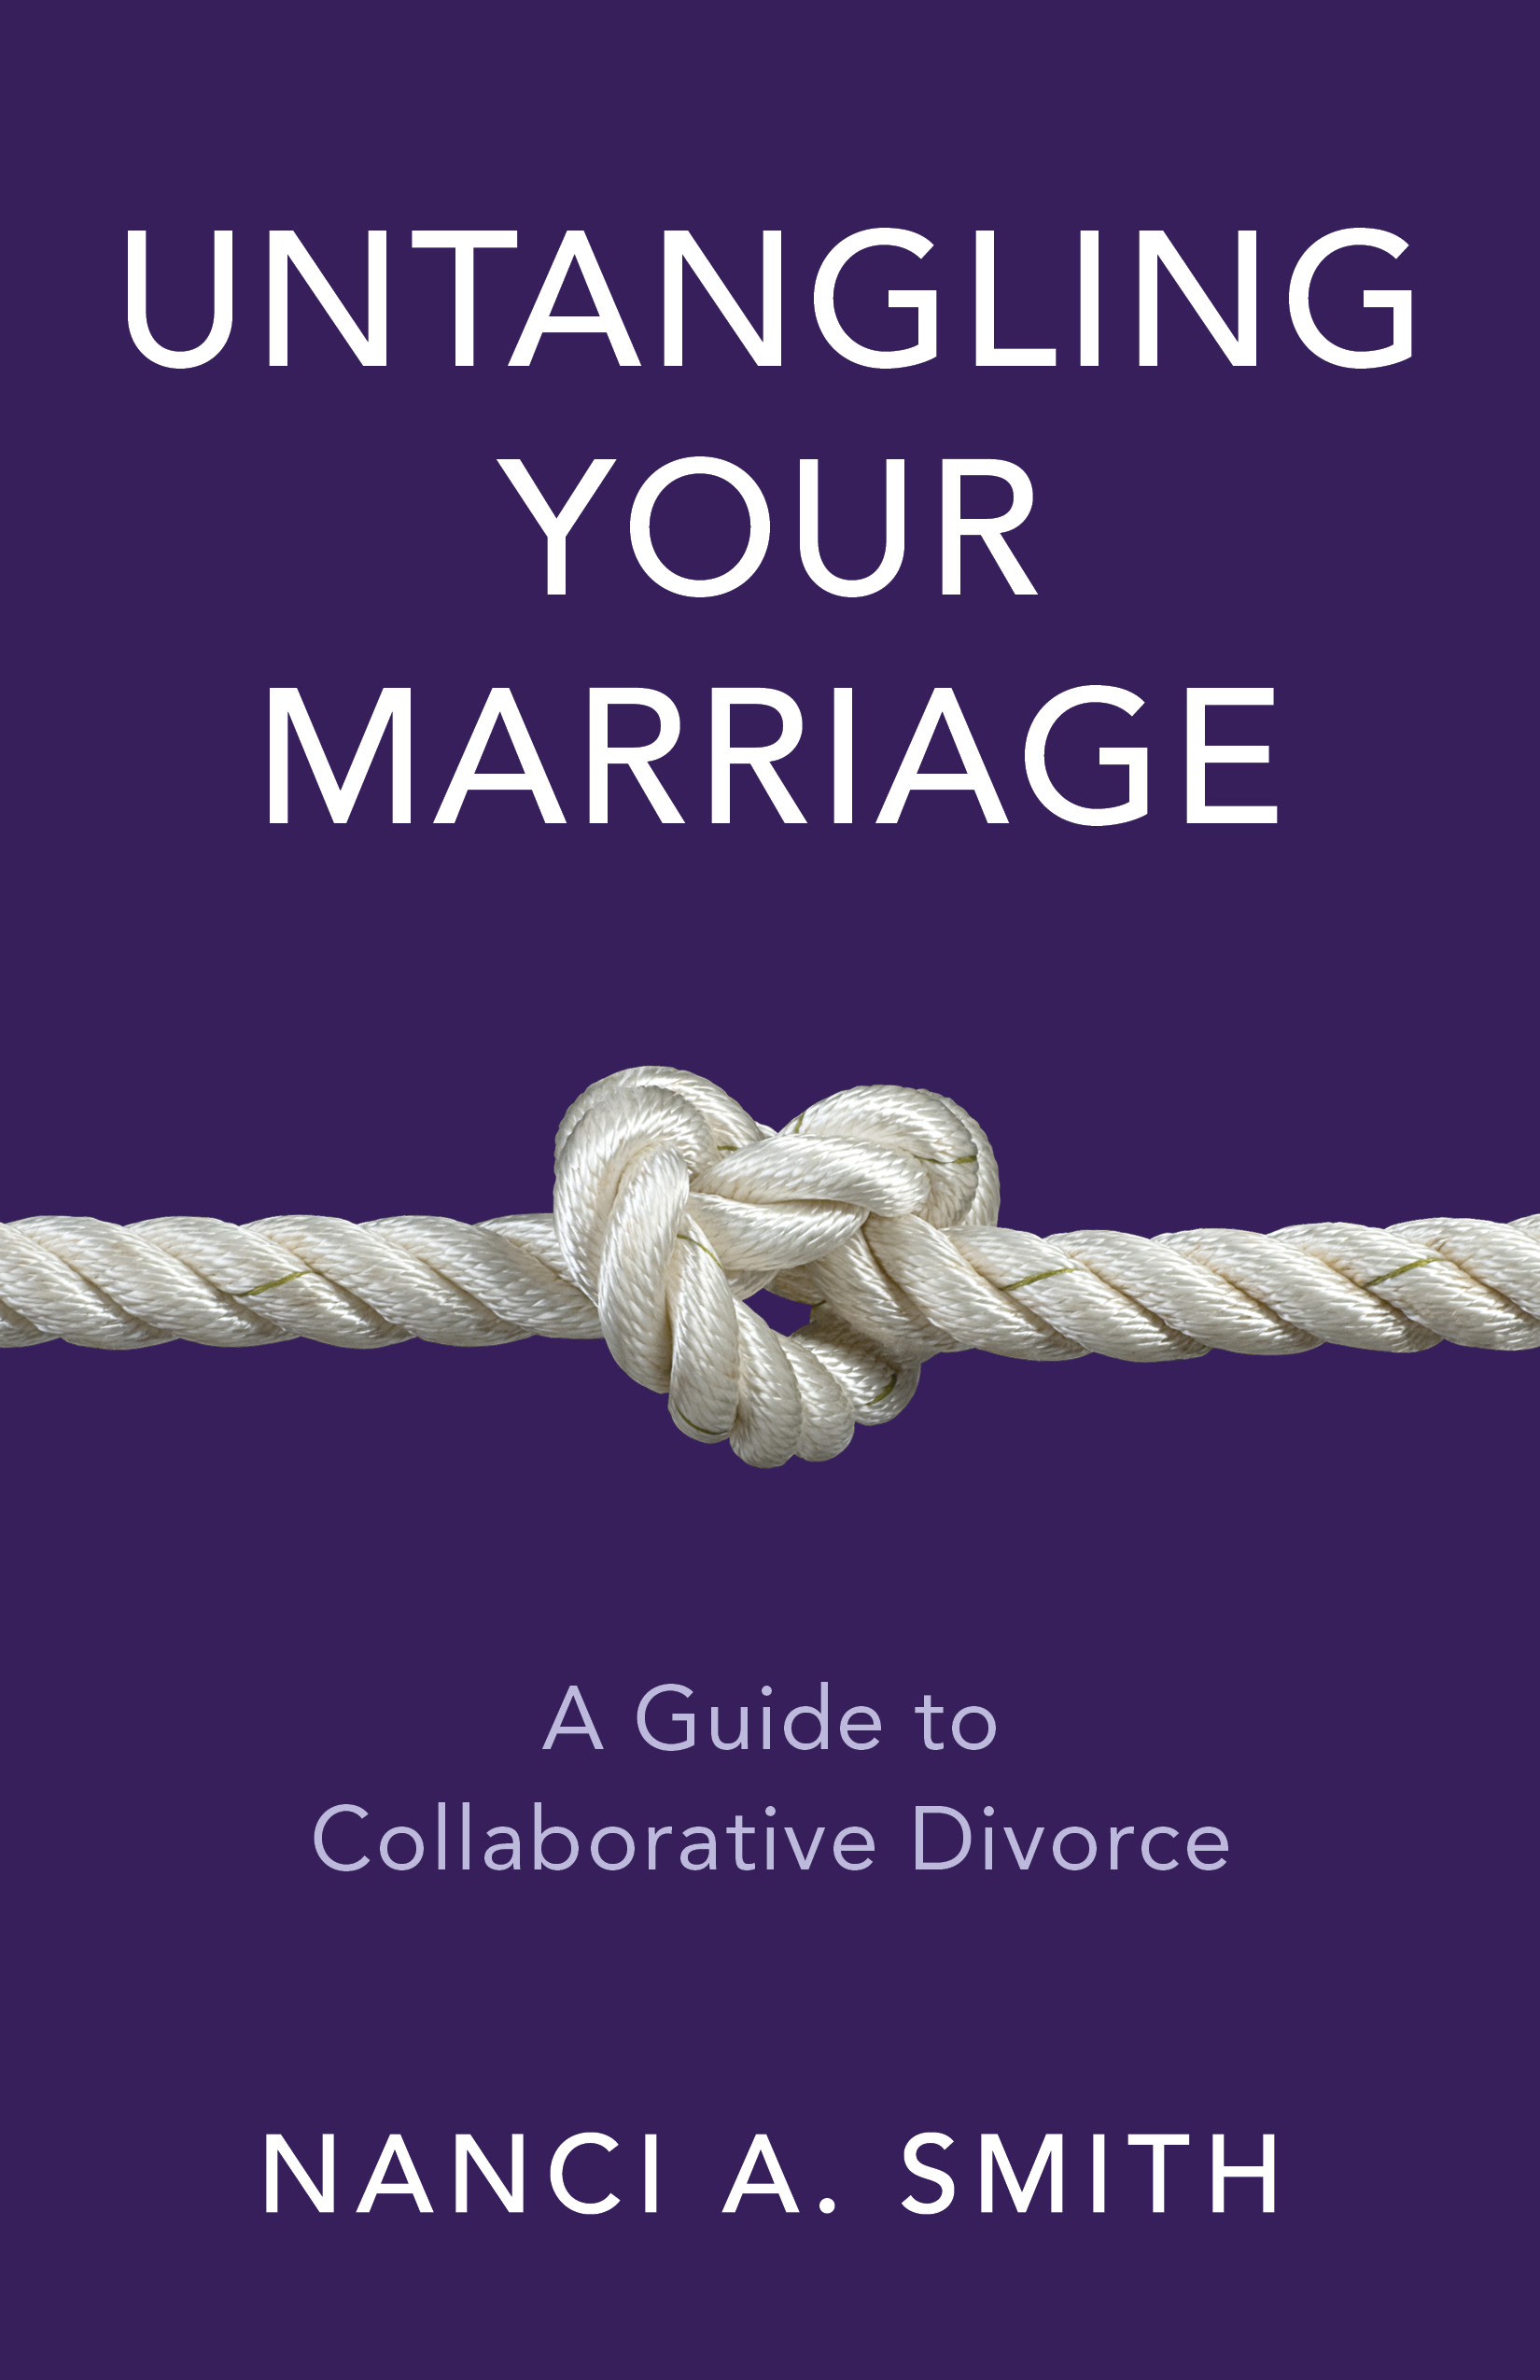 Untangling Your Marriage: A Guide to Collaborative Divorce